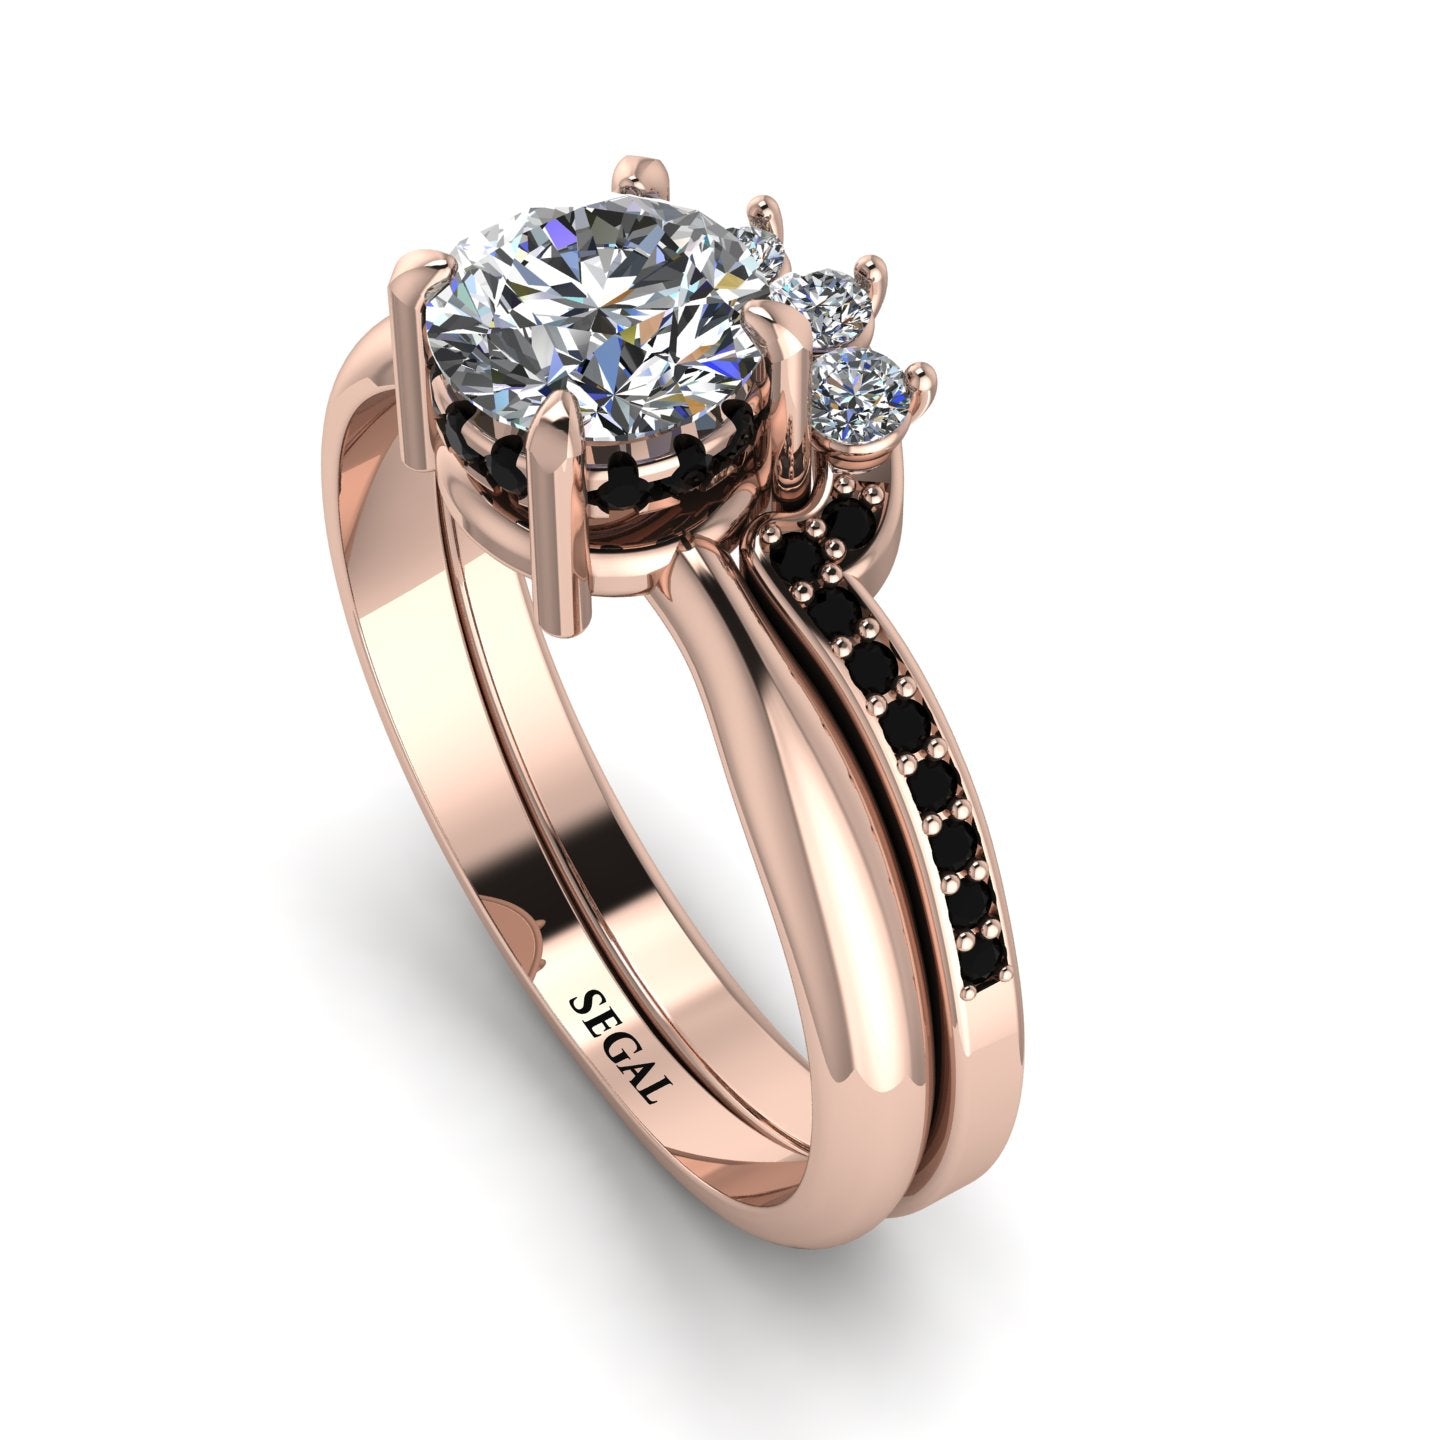 ALL WEDDING RINGS FOR HER – Segal Jewelry